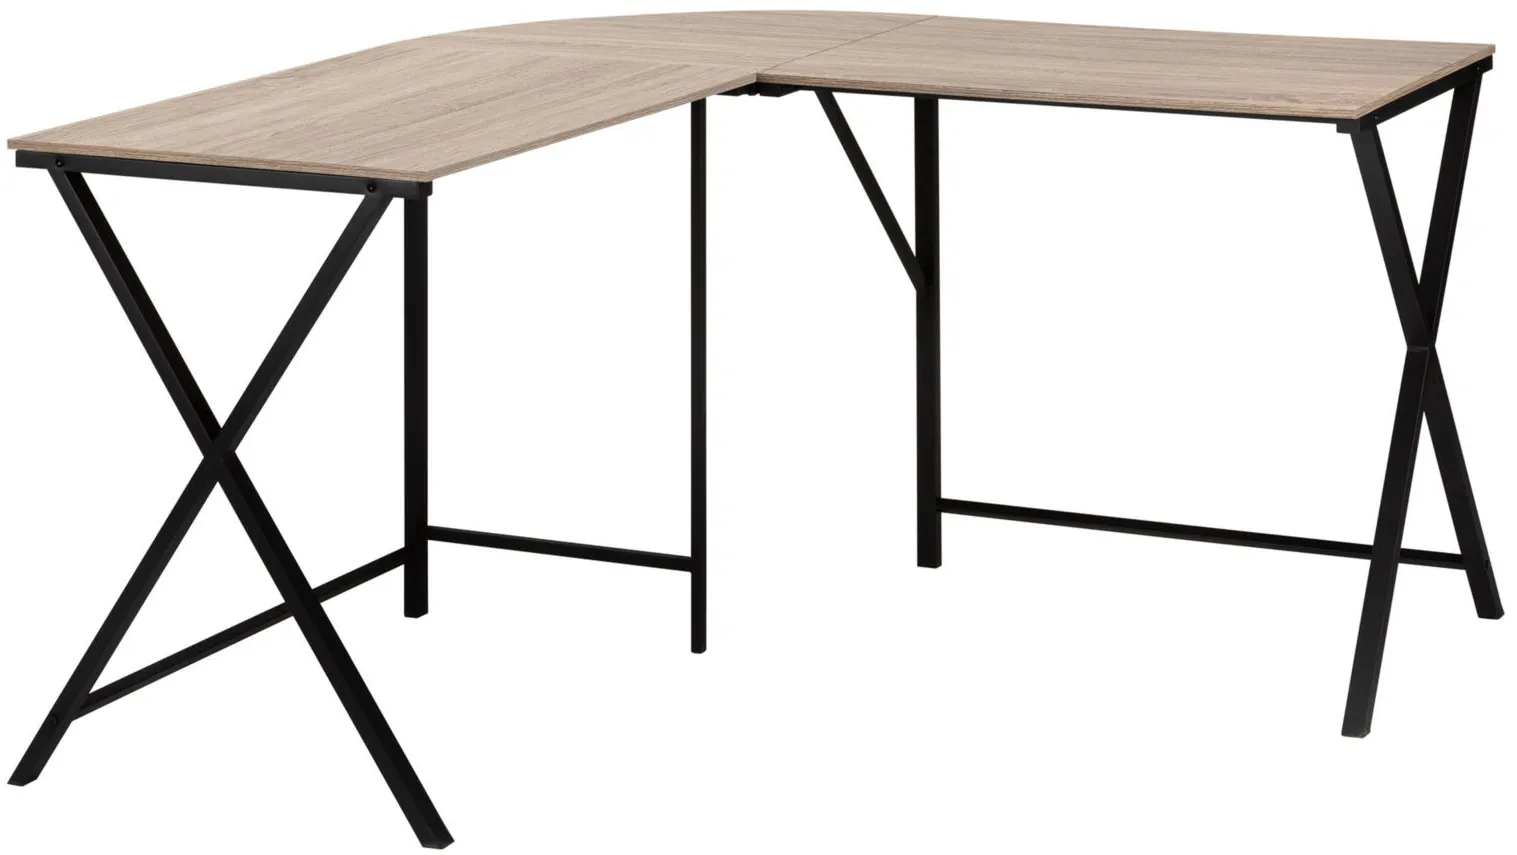 Balthazar L-Shaped Computer Desk in Dark Taupe by Monarch Specialties